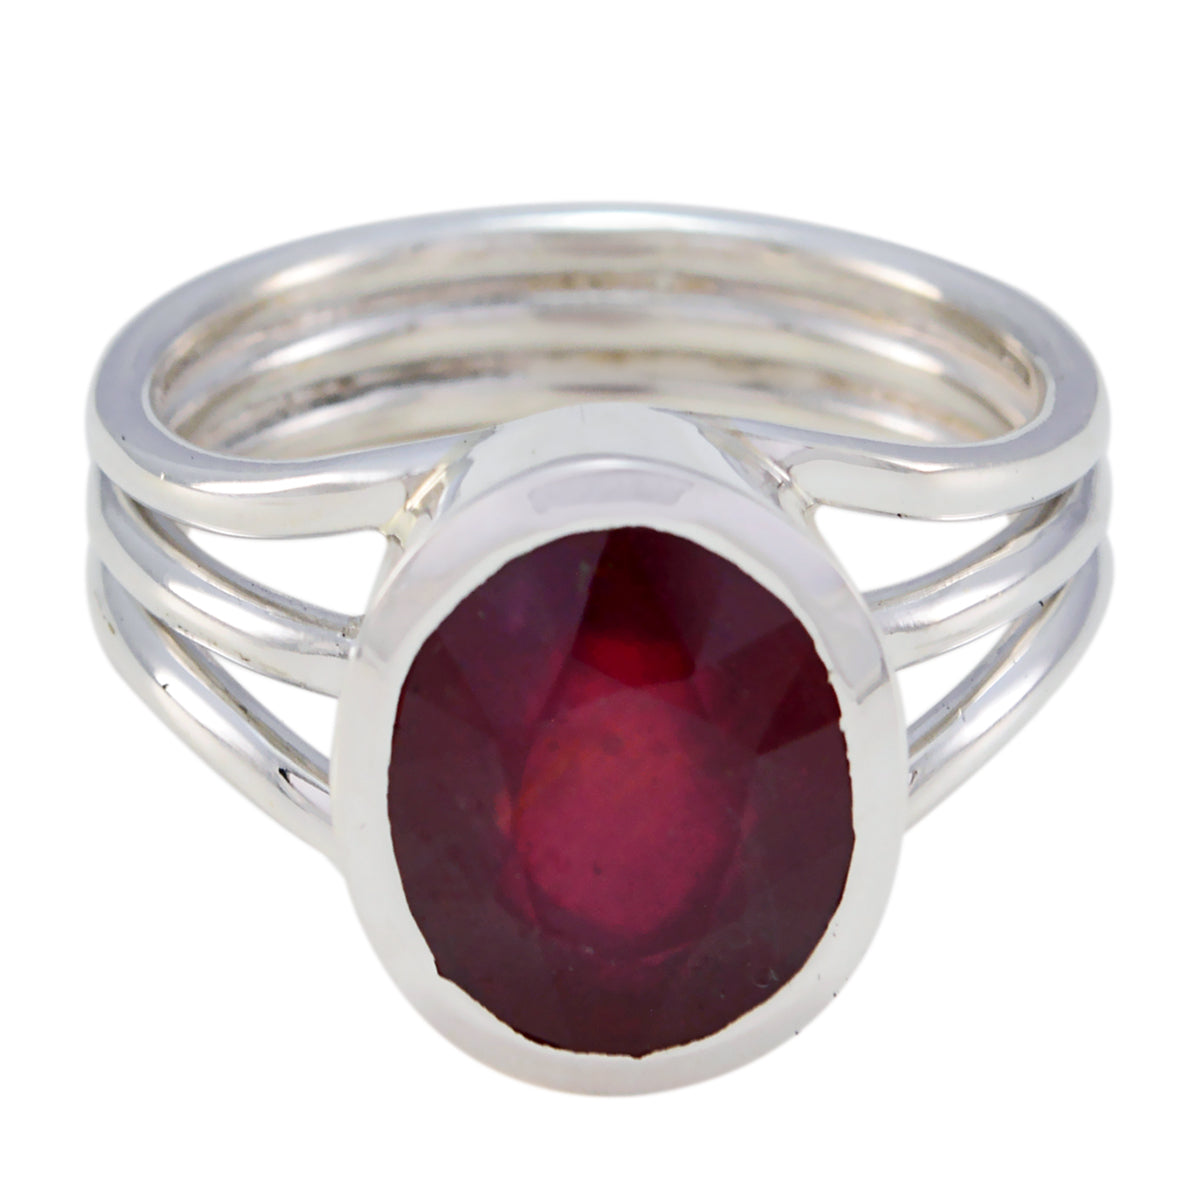 Glamorous Gem Indianruby 925 Sterling Silver Ring Jewelry Stands